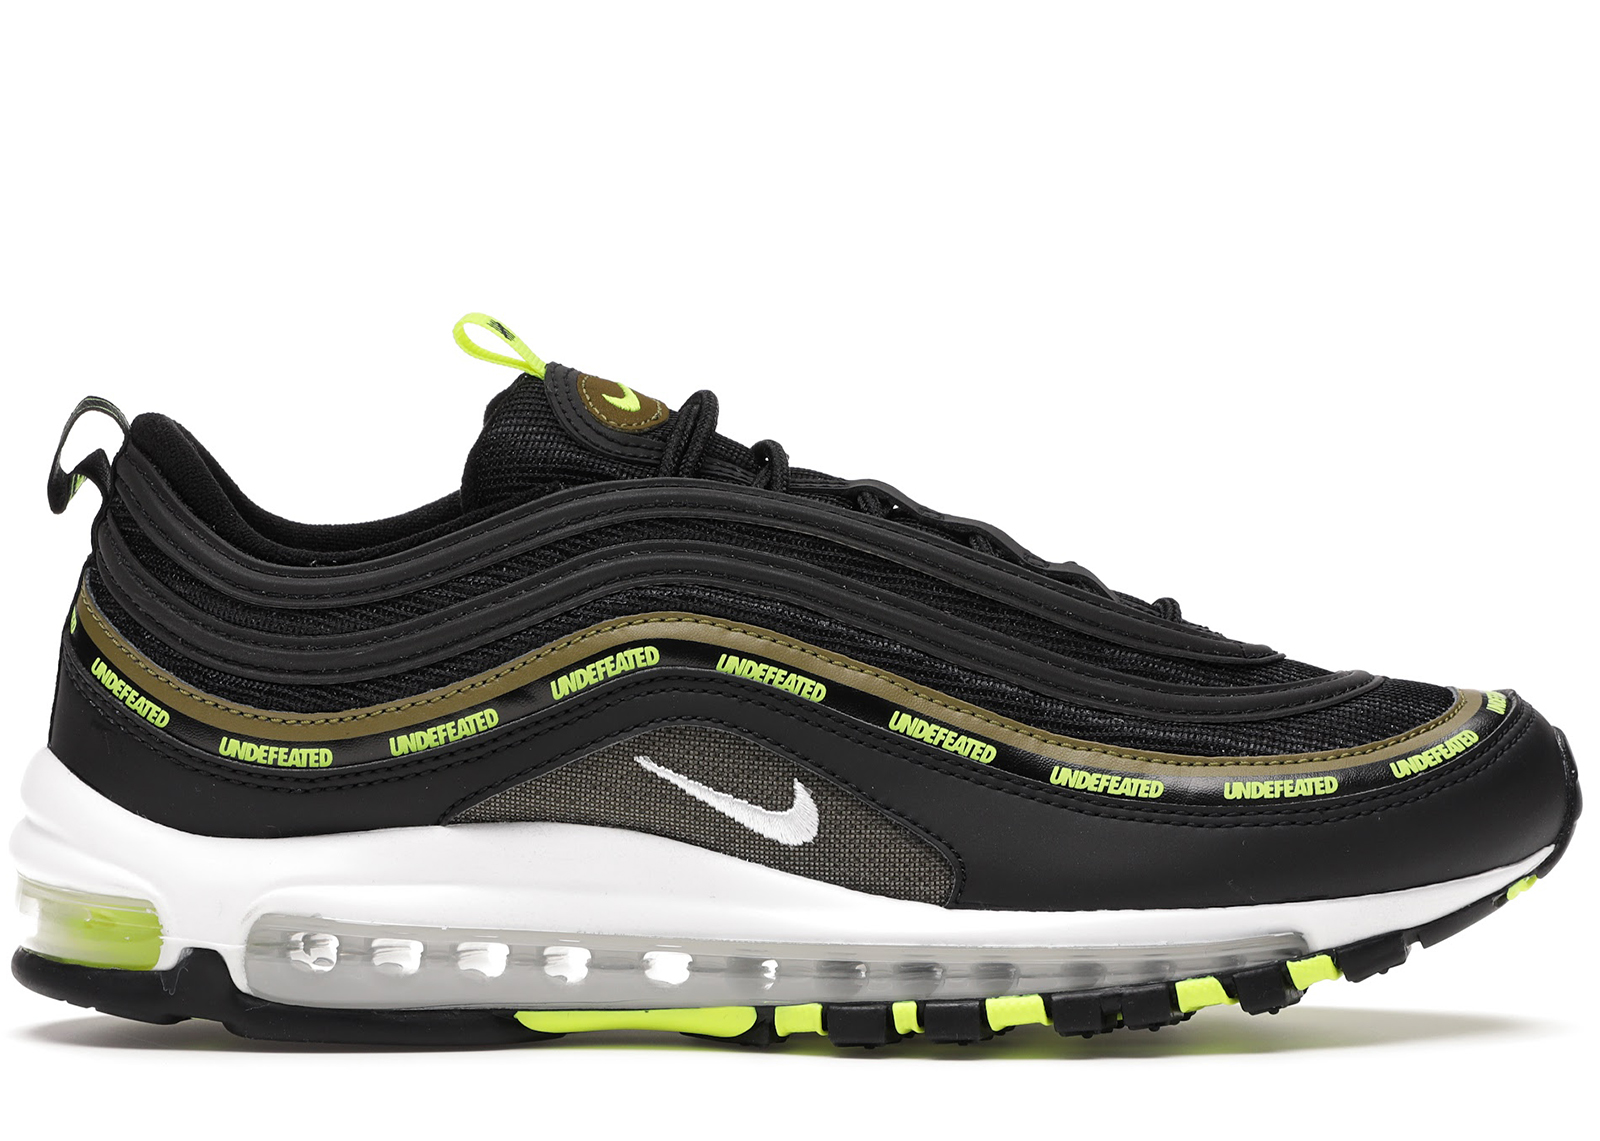 Nike Air Max 97 Undefeated Black Volt - DC4830-001